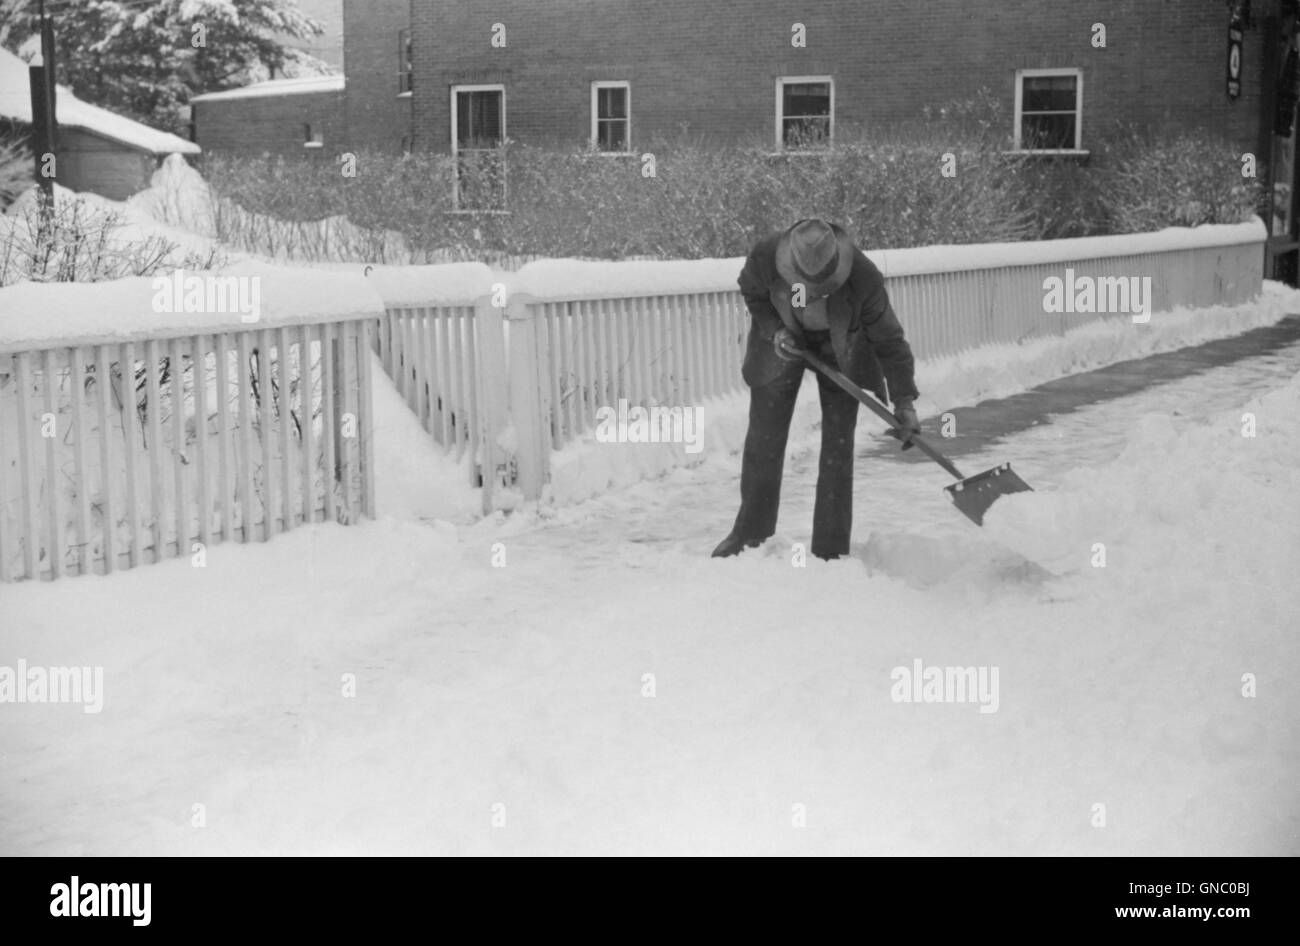 Man Clearing Snow from Sidewalk after Heavy Snowfall, Woodstock, Vermont, USA, Marion Post Wolcott for Farm Security Administration, March 1940 Stock Photo